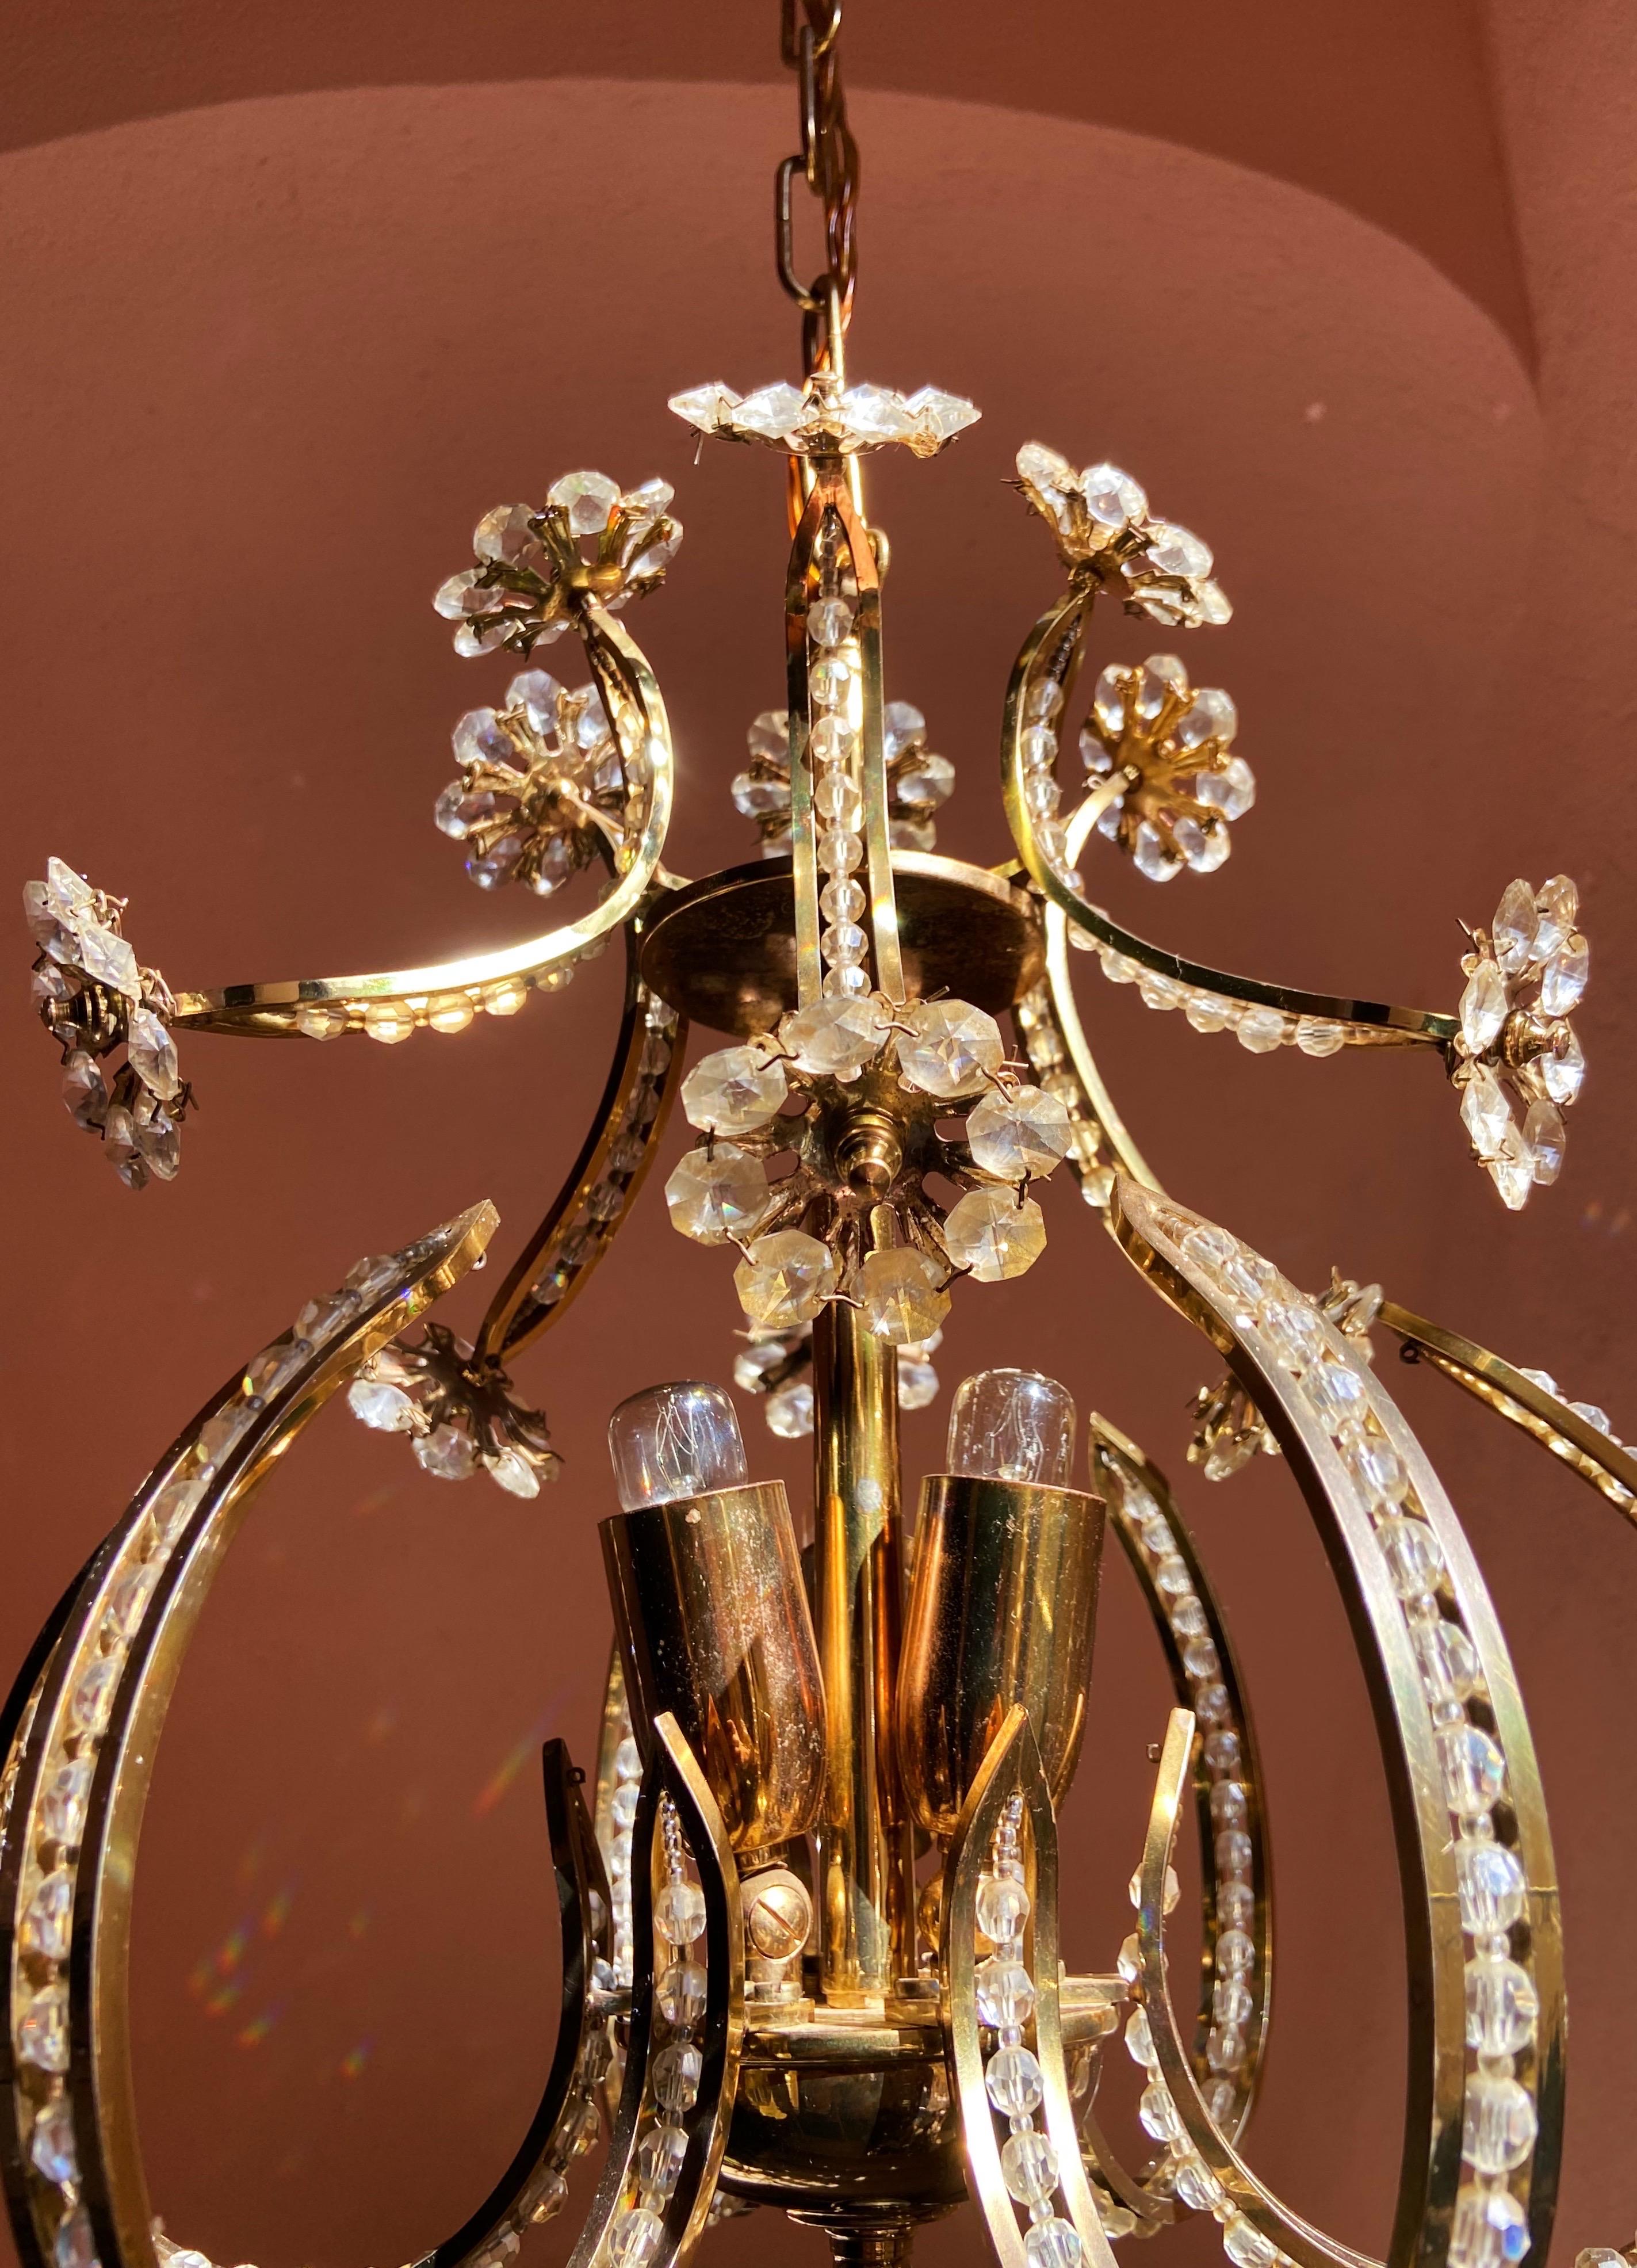 Chandelier by Palwa, 1960. It features a gold-plated brass frame with crystal prisms and beads.

Details
Creator: Palwa
Dimensions: Height: 35 cm Height with chain: 85 cm Diameter: 33 cm
Materials and Techniques: Chrome, brass, crystal,